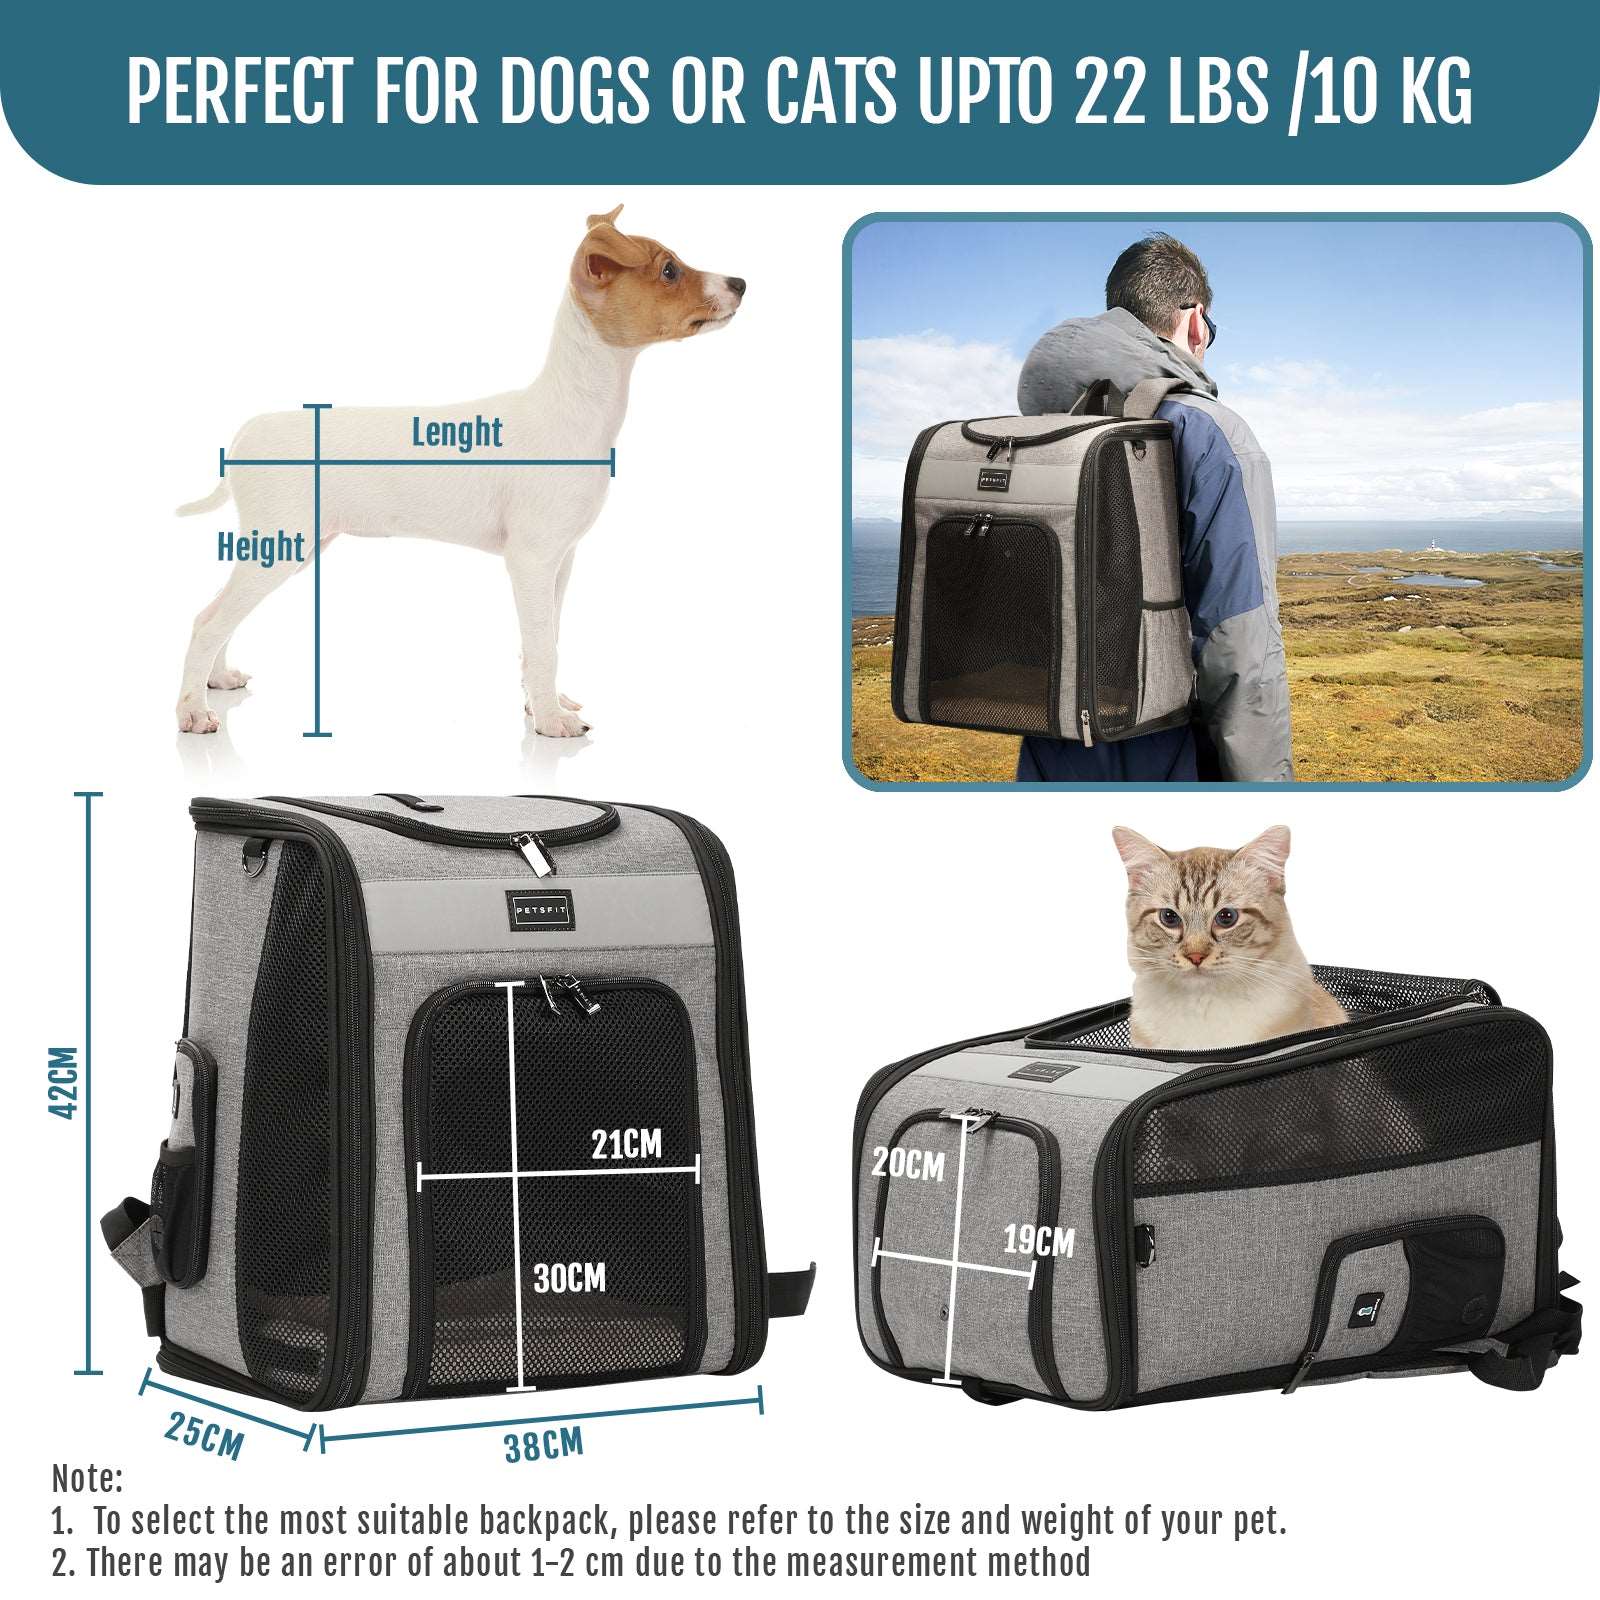 Petsfit-Soft-Pet-Backpack-Carrier-for-Hiking-03